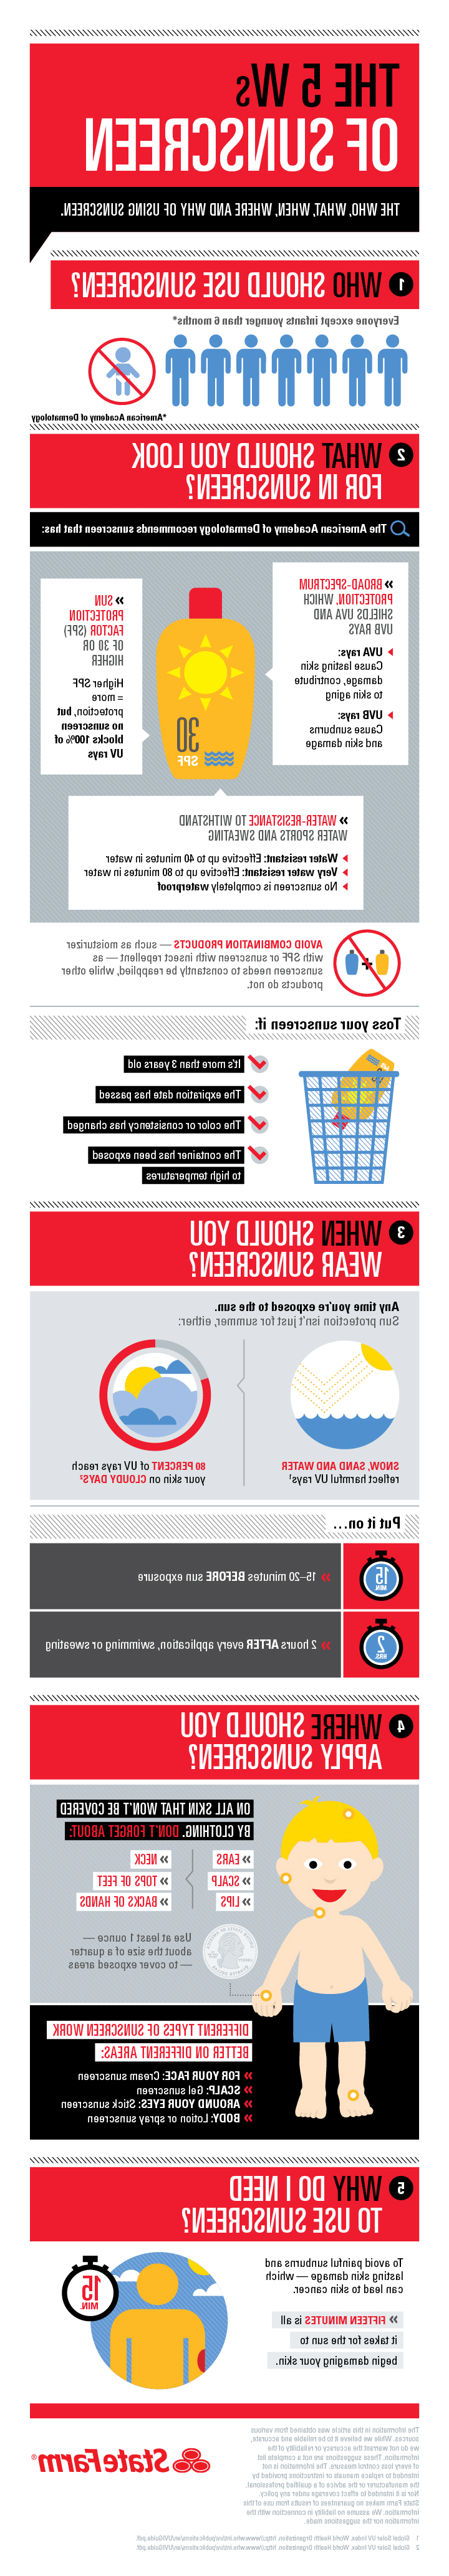 Infographic that shares the 5 Ws of sunscreen (who, what, when, where, why).